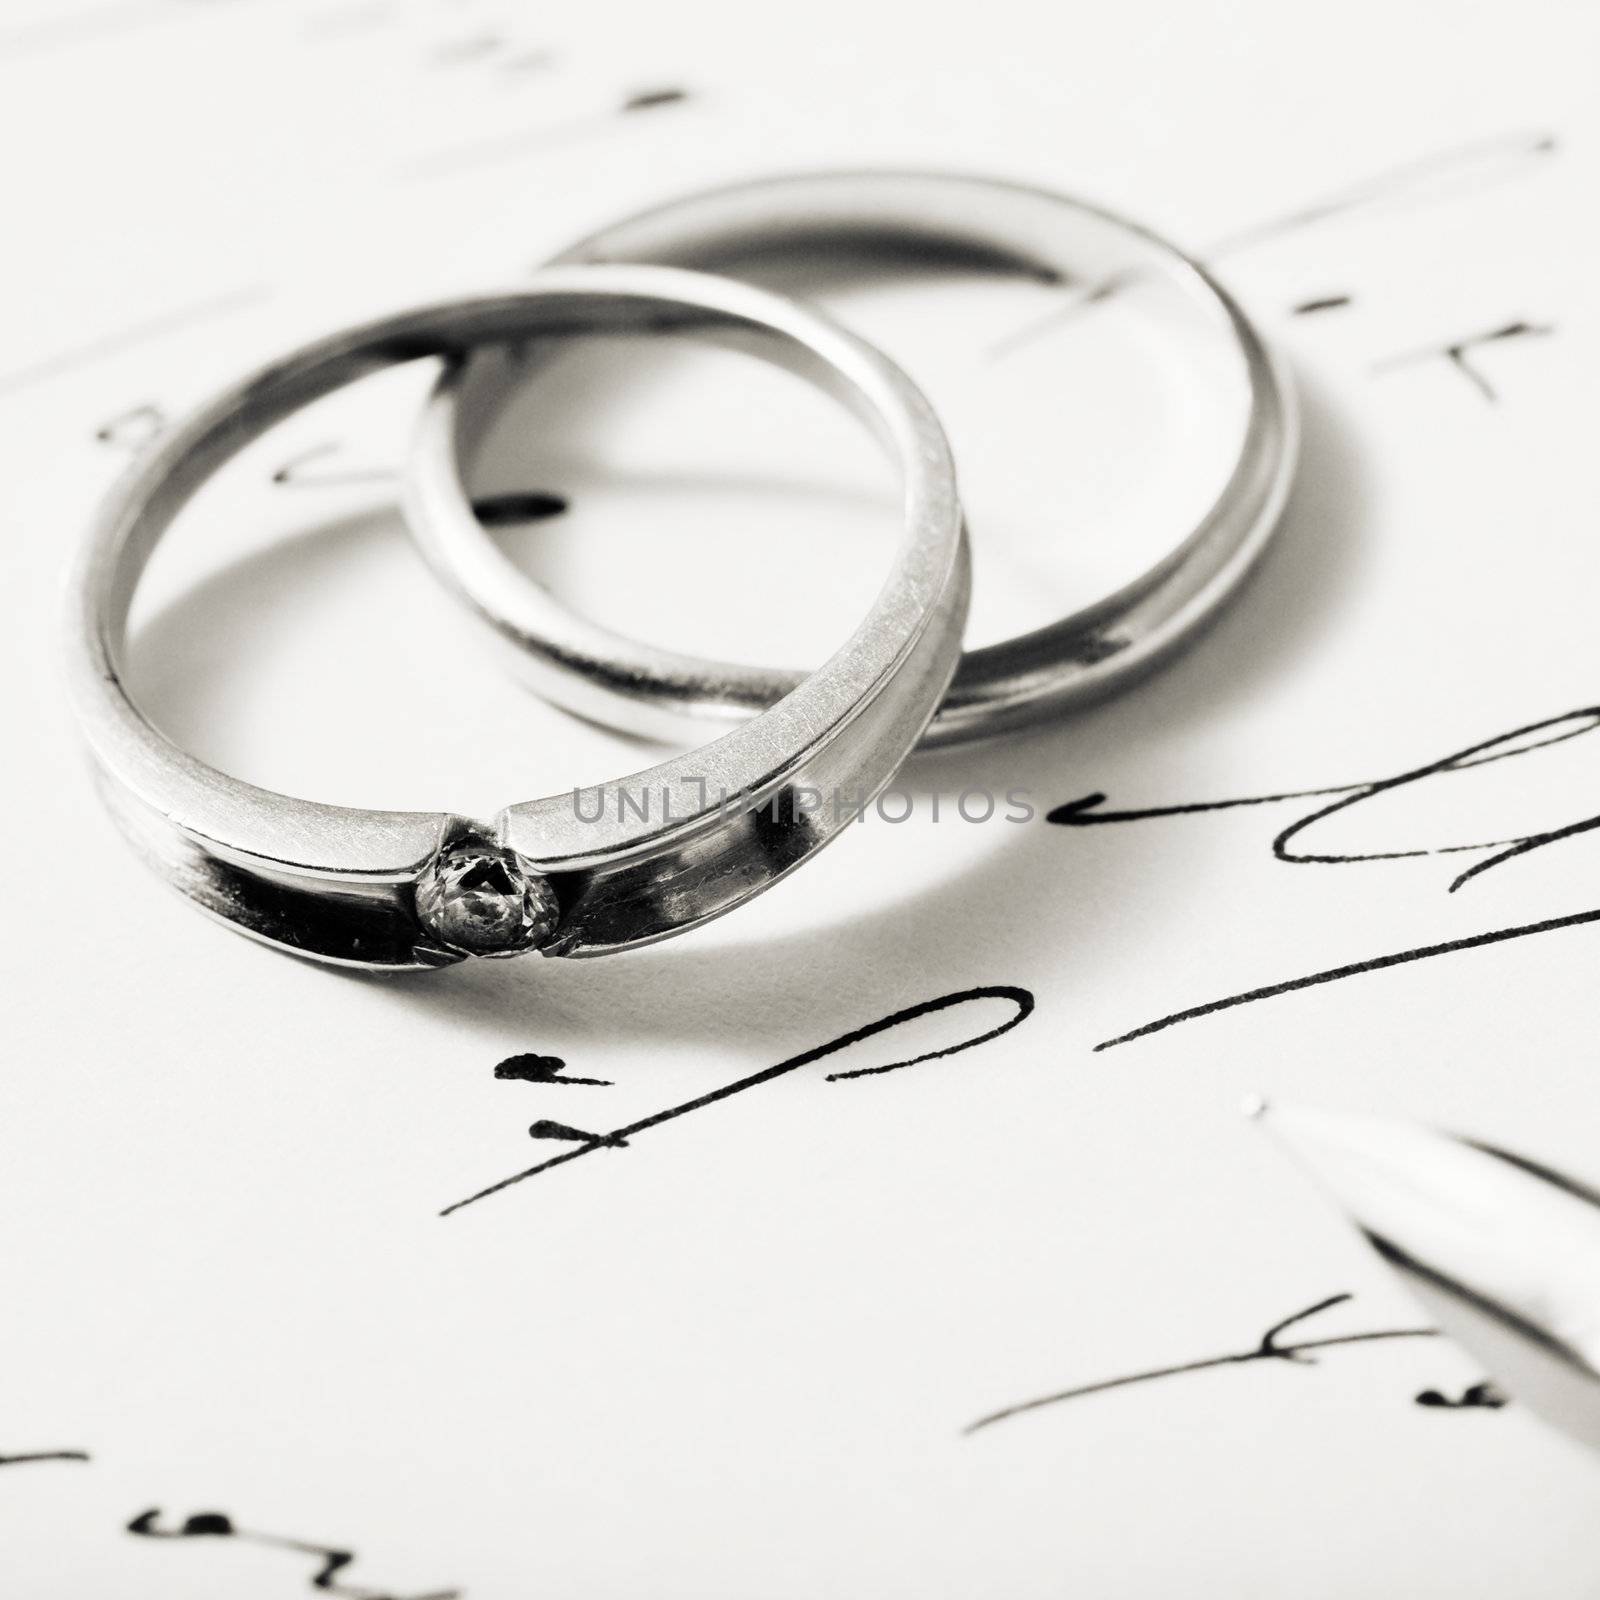 Stock photo: an image of two silver rings on a letter